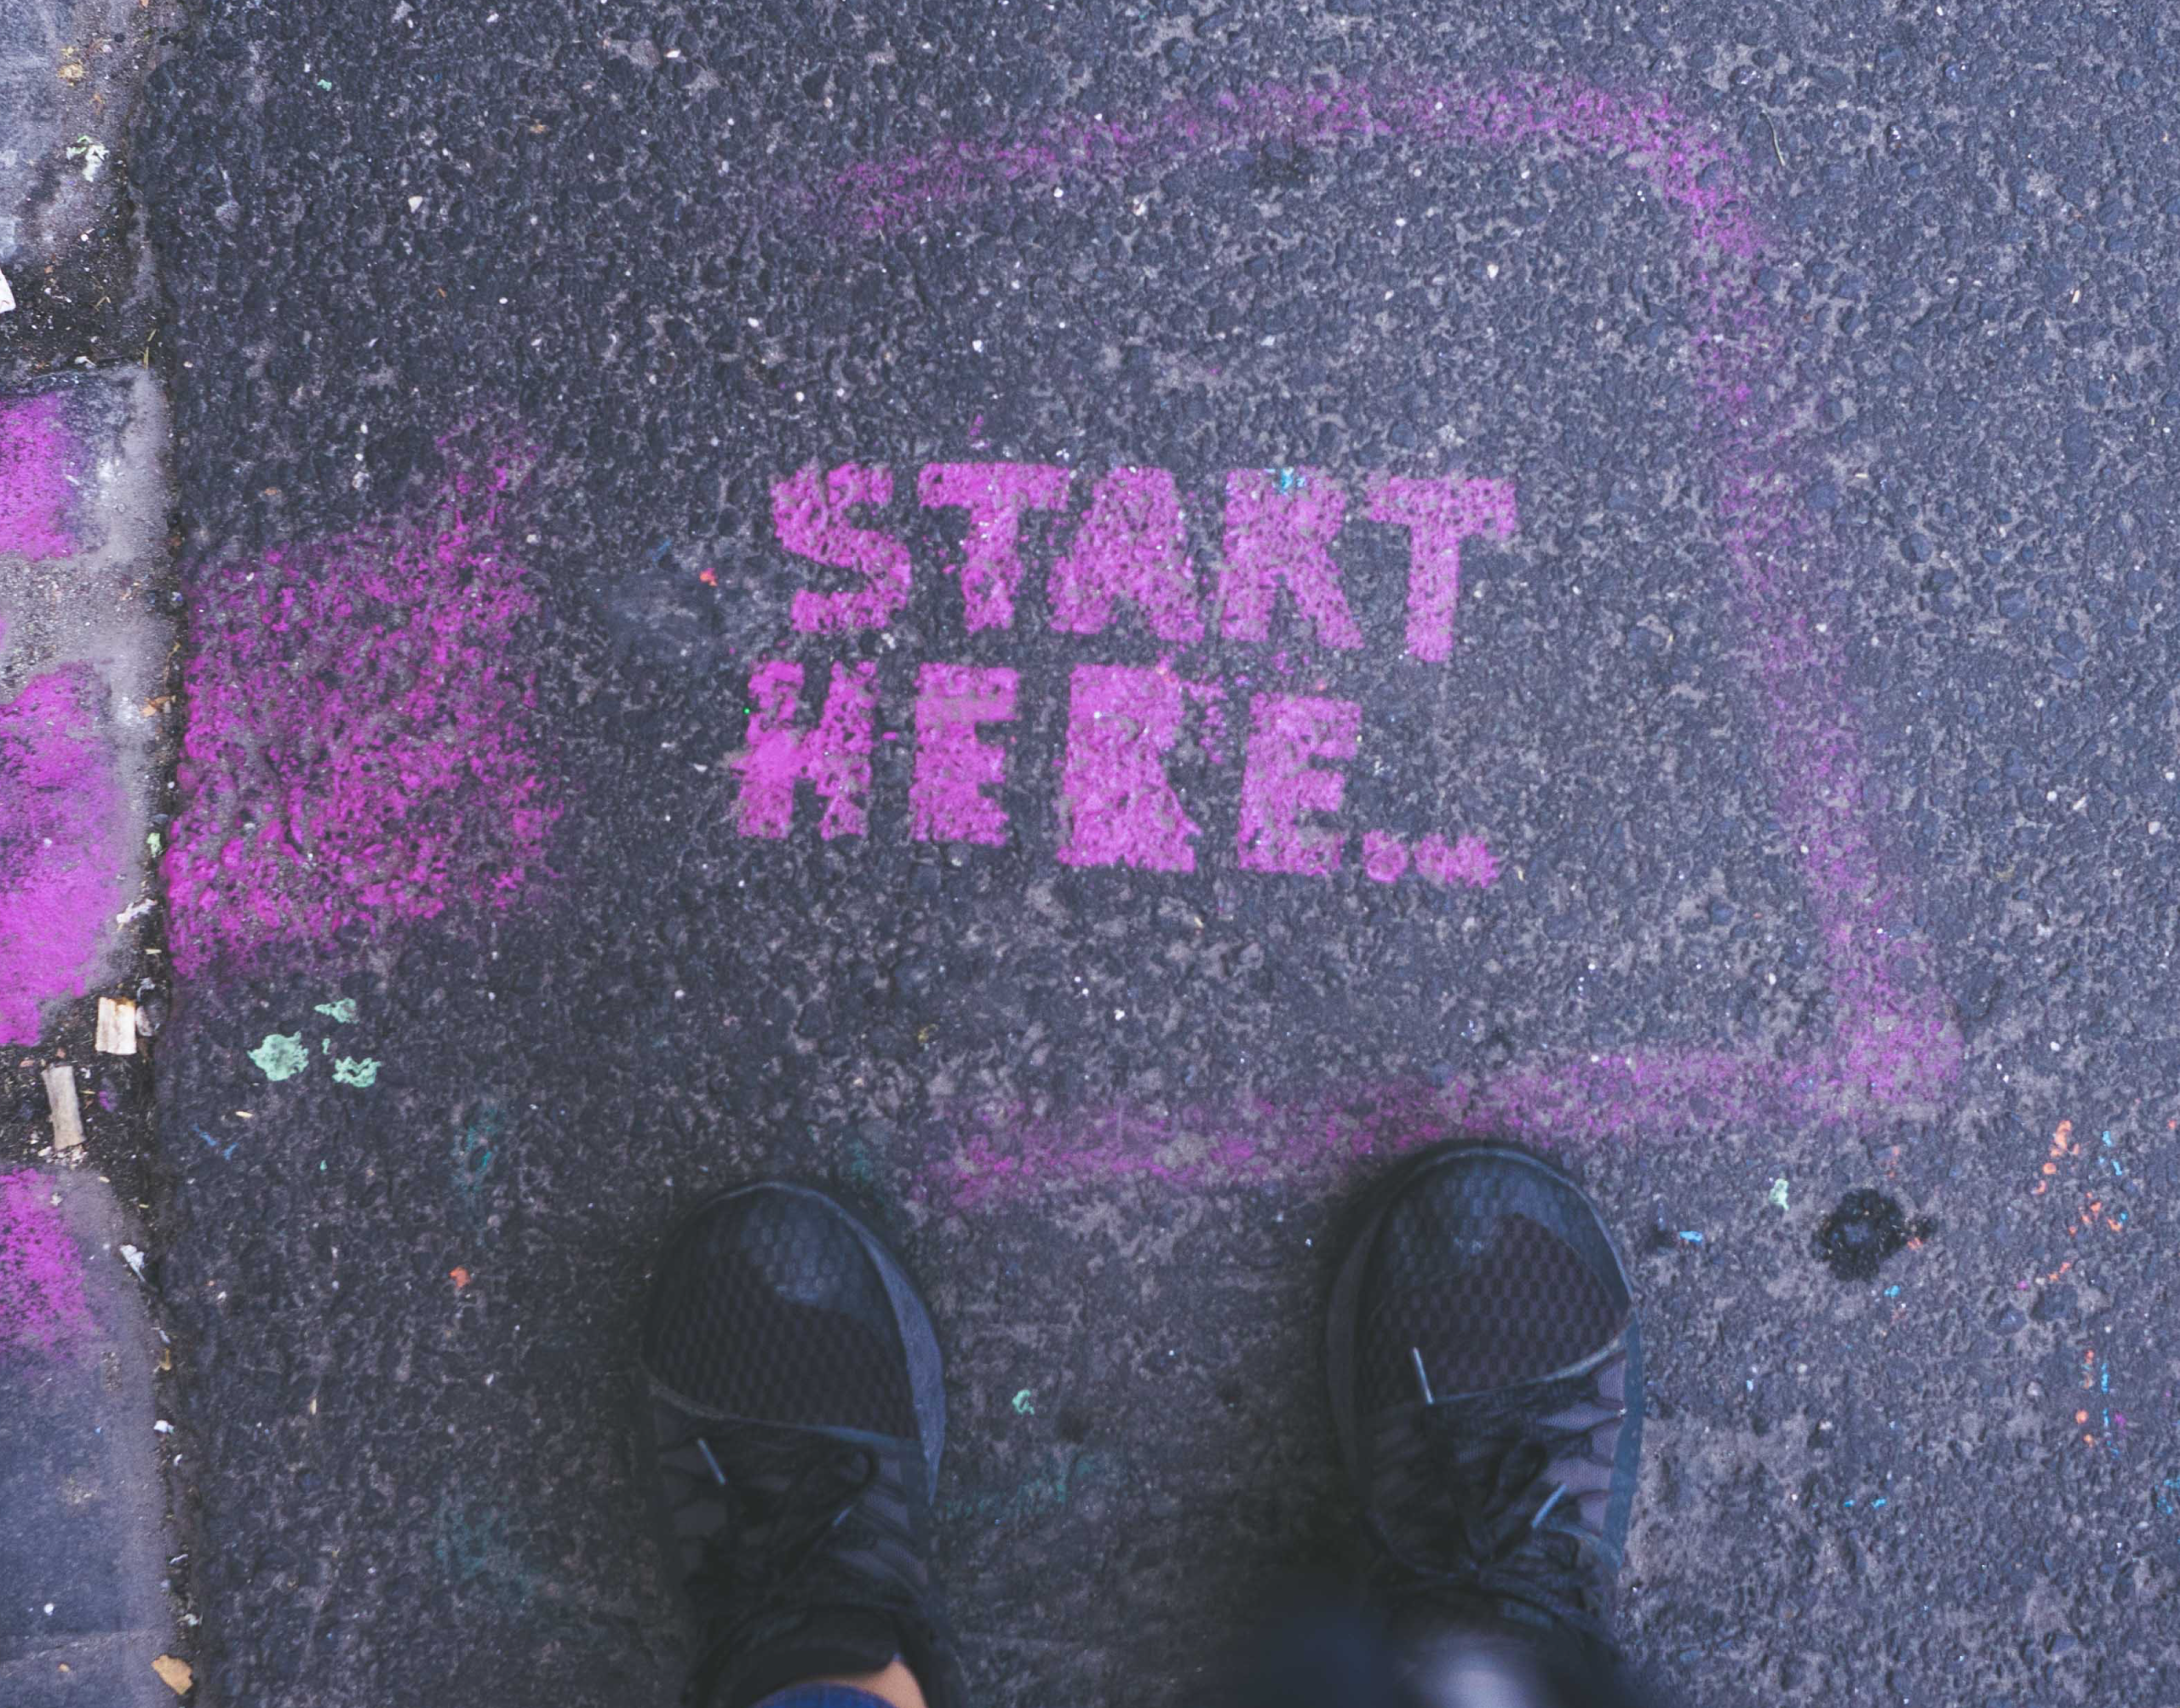 image of concrete with the words "start here" painted in pink